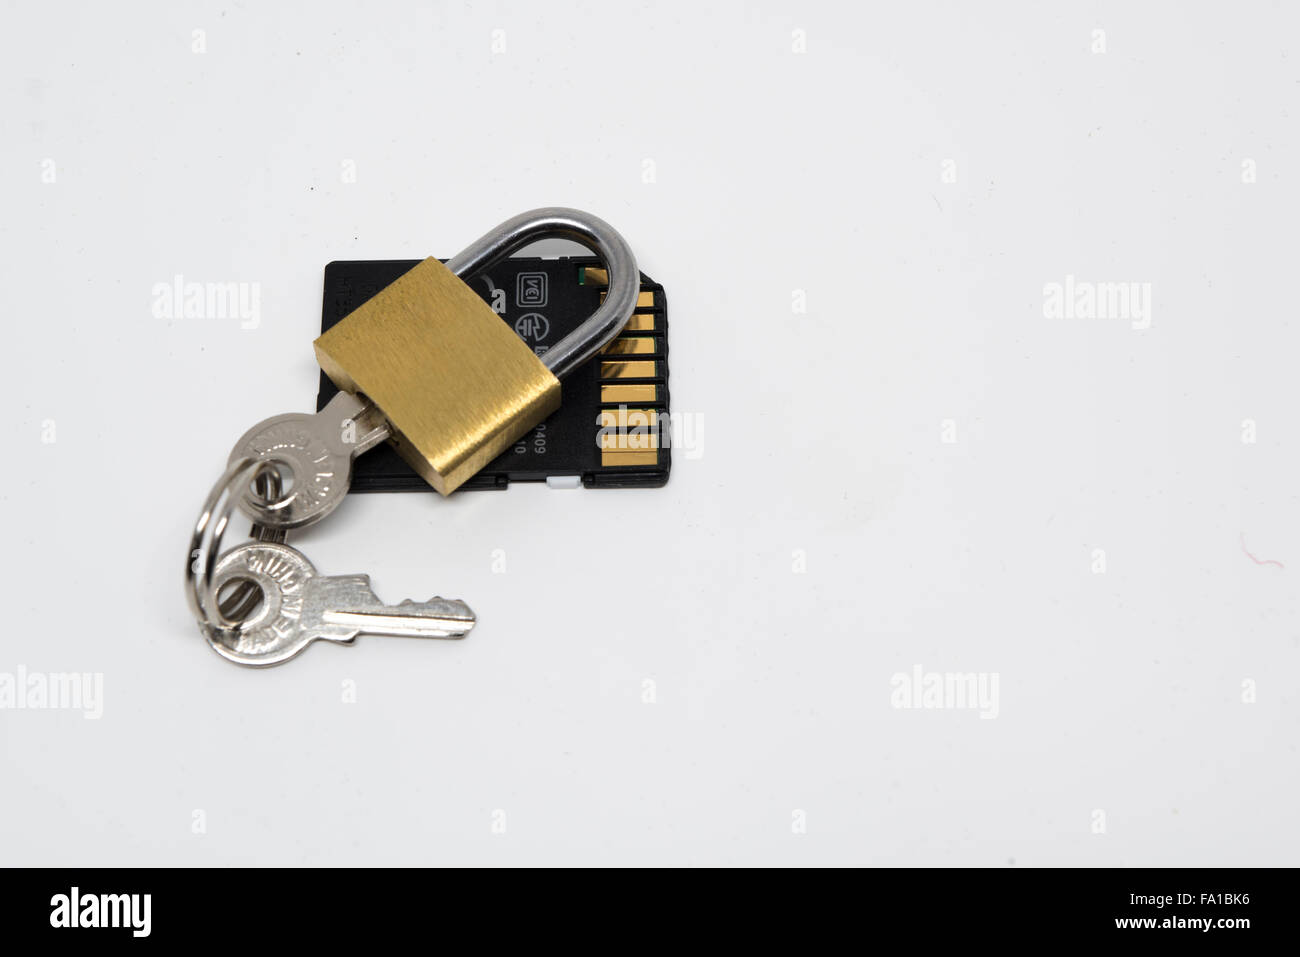 Data Security concept image padlock and storage card Stock Photo